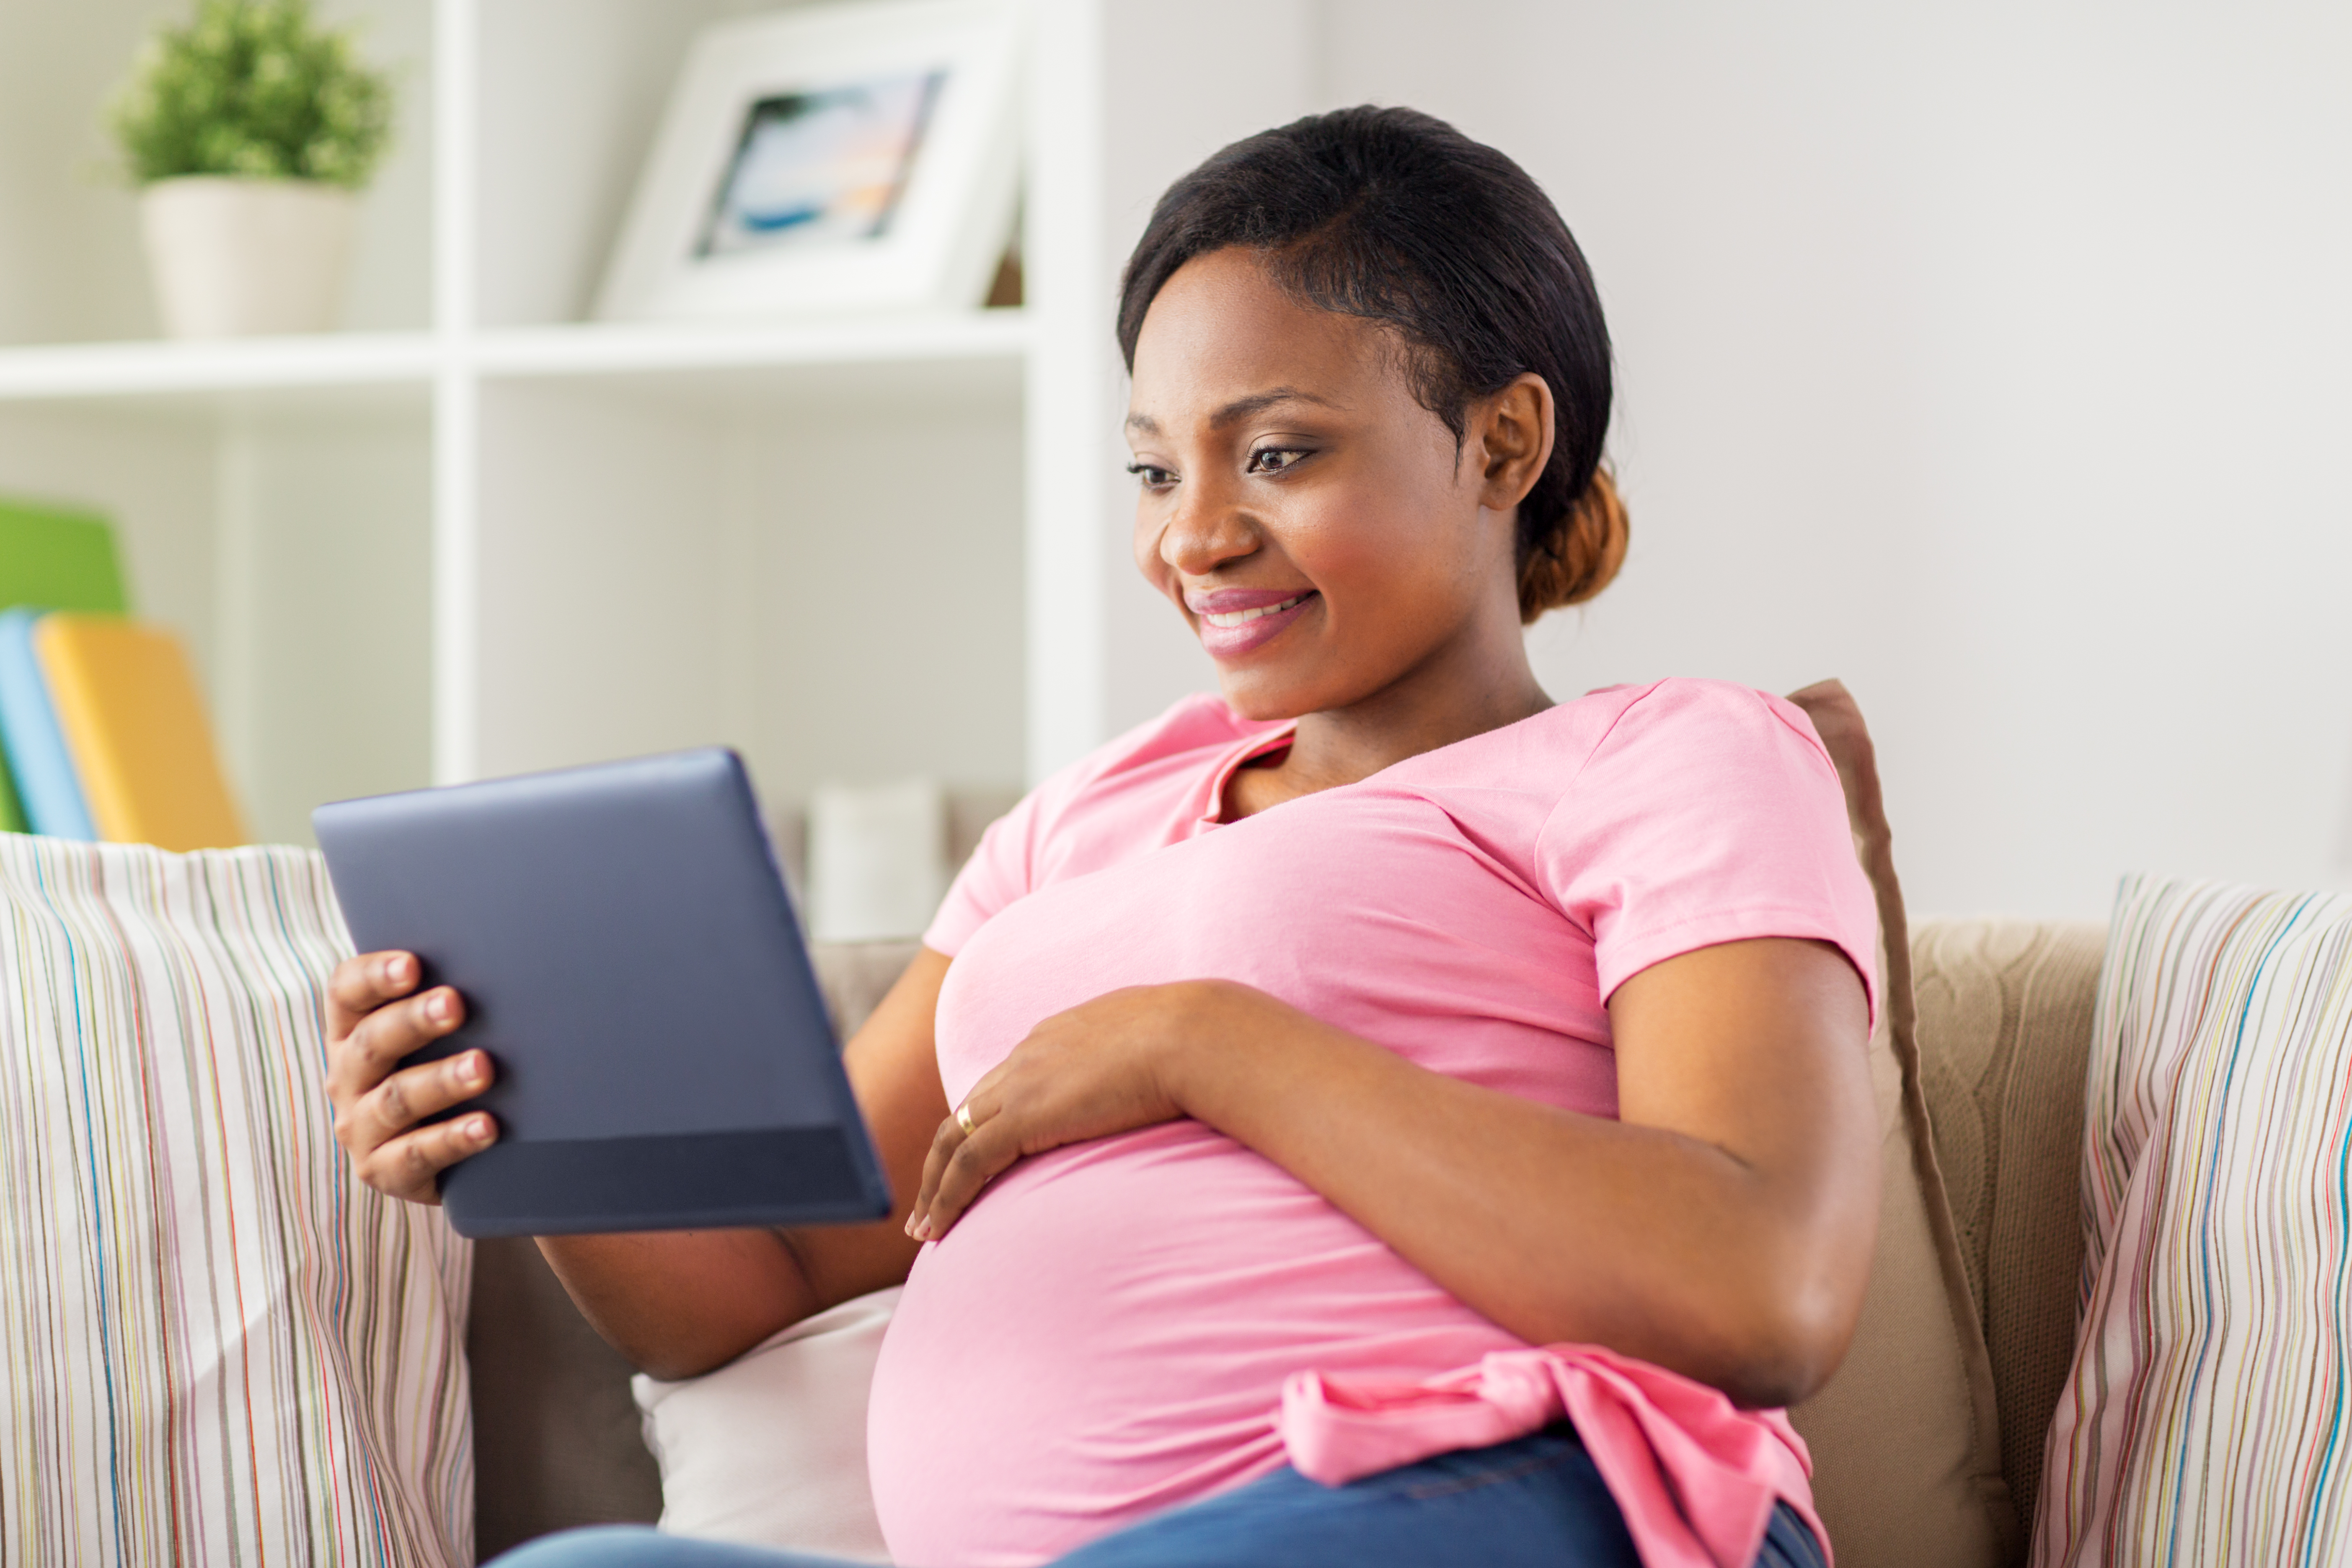 Client enjoying a Prenatal Breastfeeding Class on their tablet while resting in their home